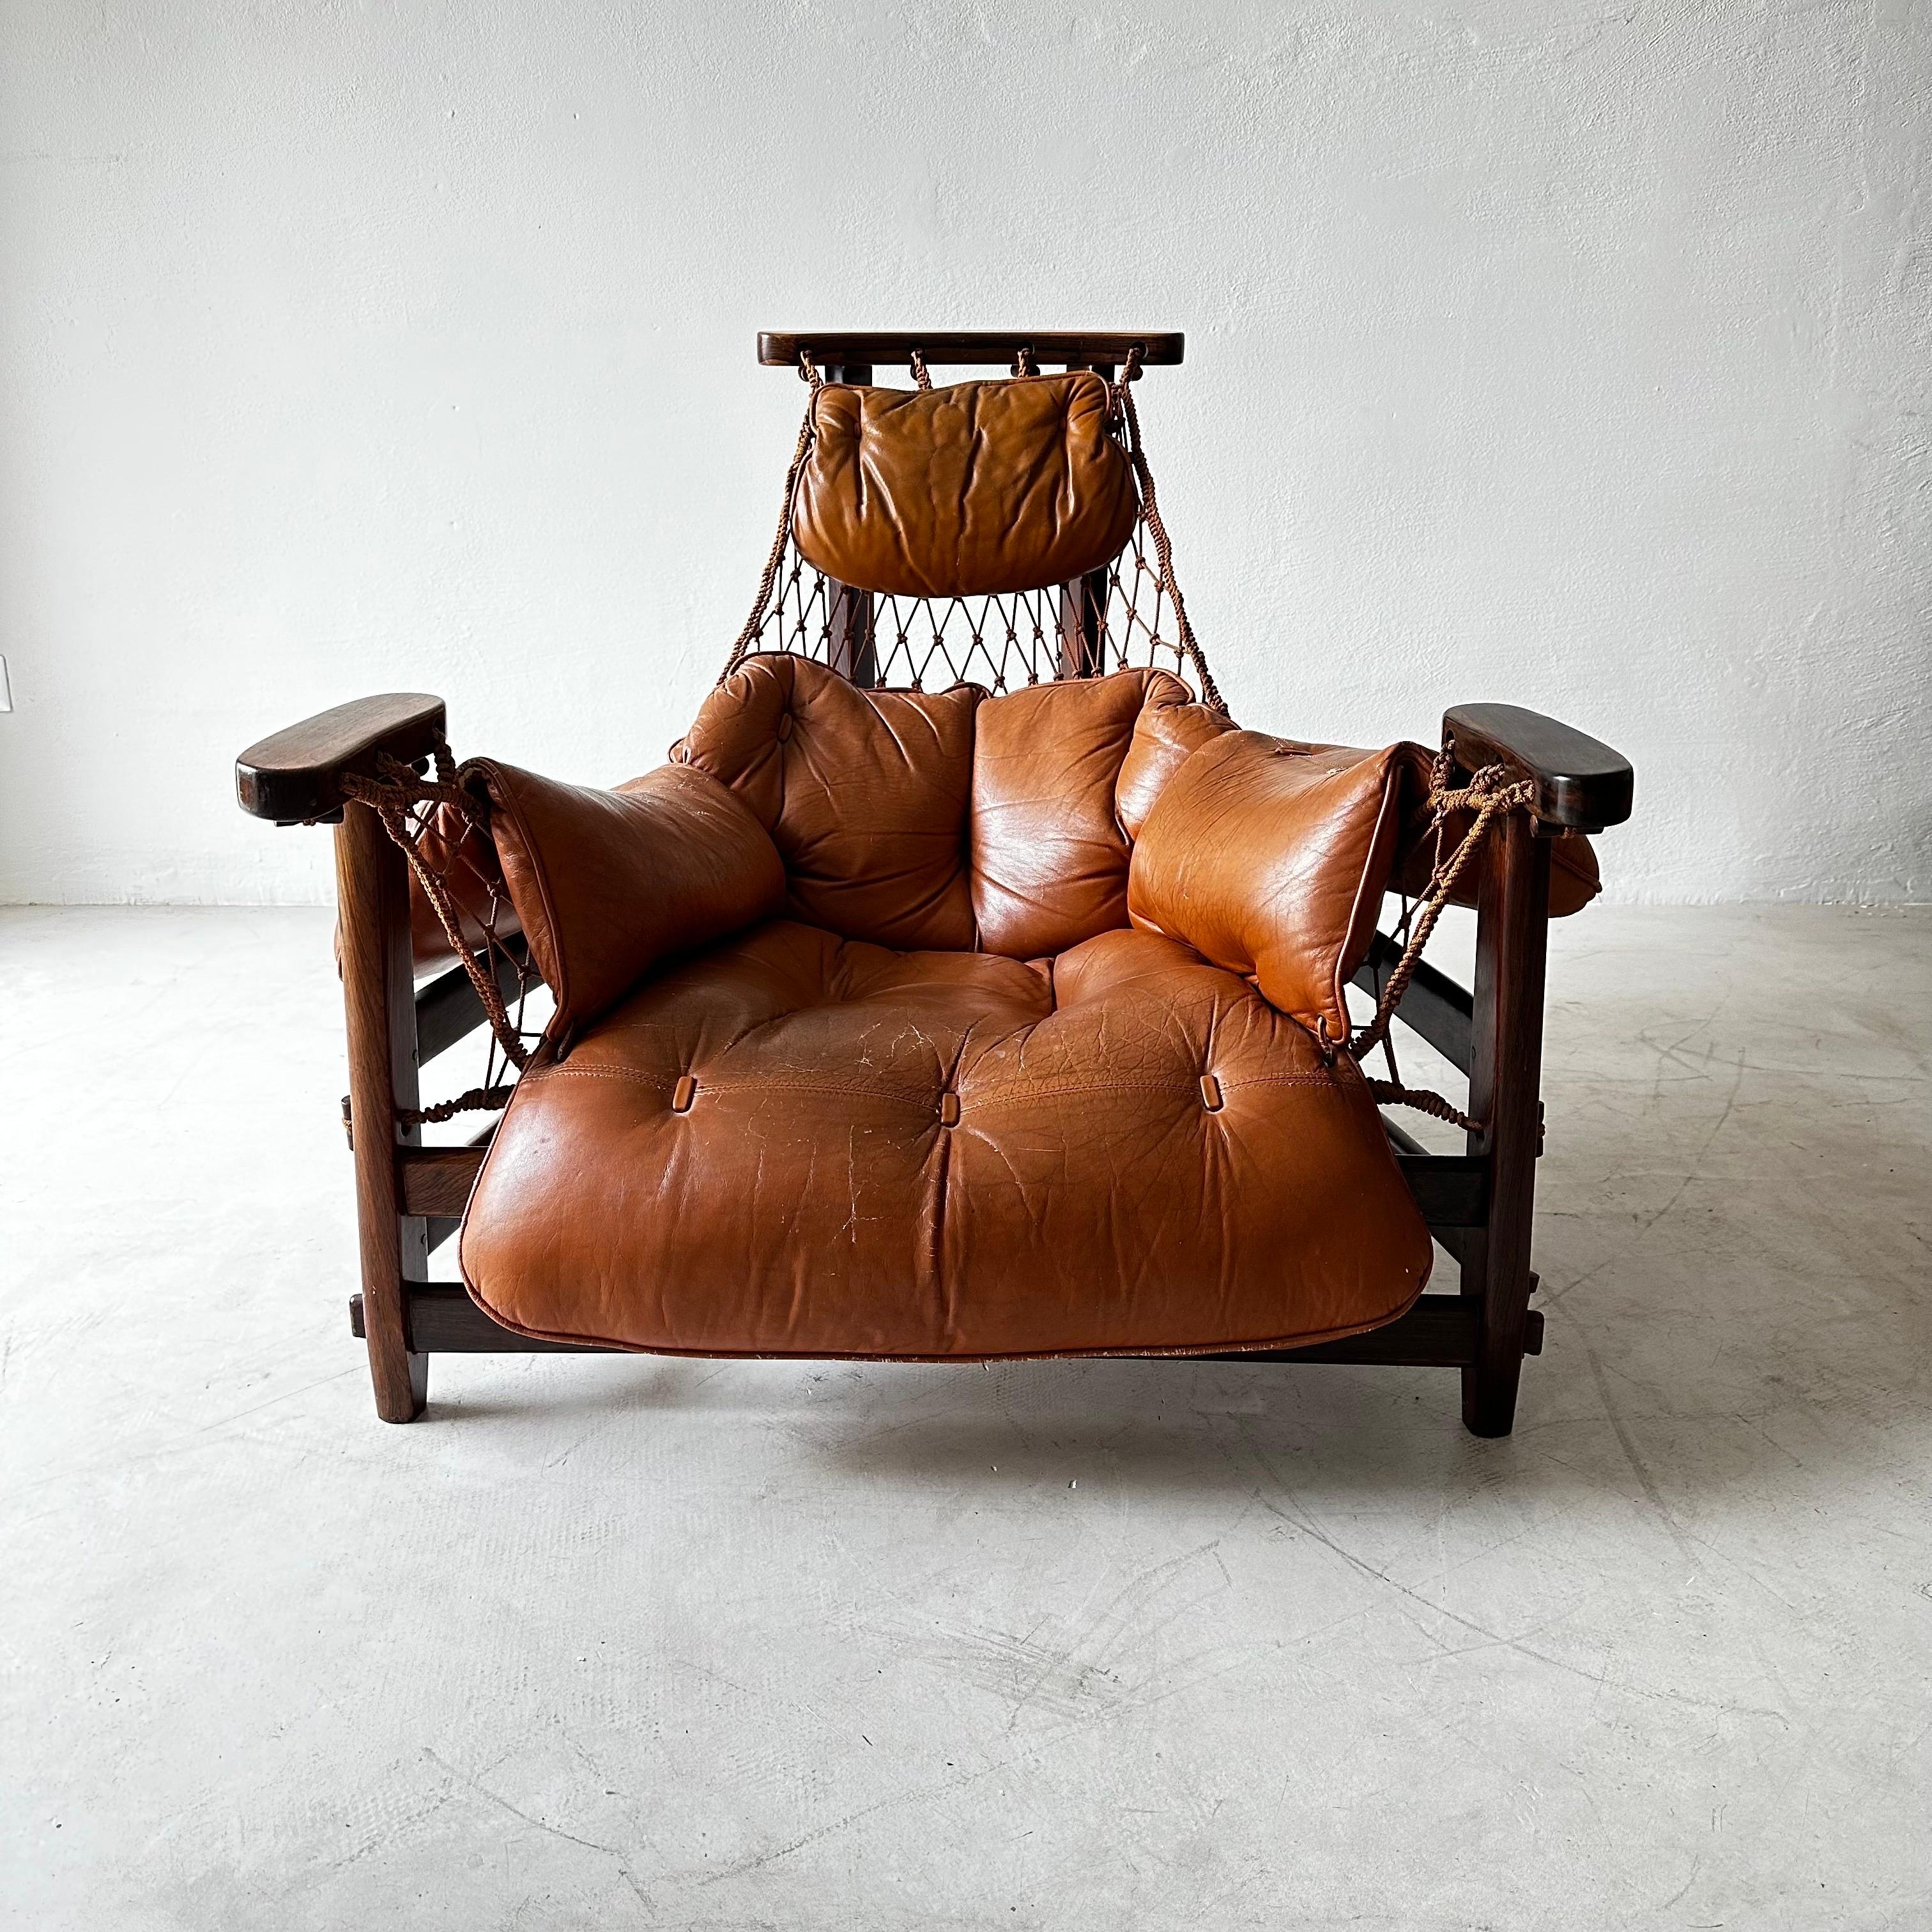 Iconic Brazilian Jangada lounge chair by Jean Gillon and Italma Wood Art, Brazil 1960s.

This breathtaking design inspired by the markets and fishermen of Brazil, is often seen and referred to as Jean Gillon's most celebrated work. The Jangada